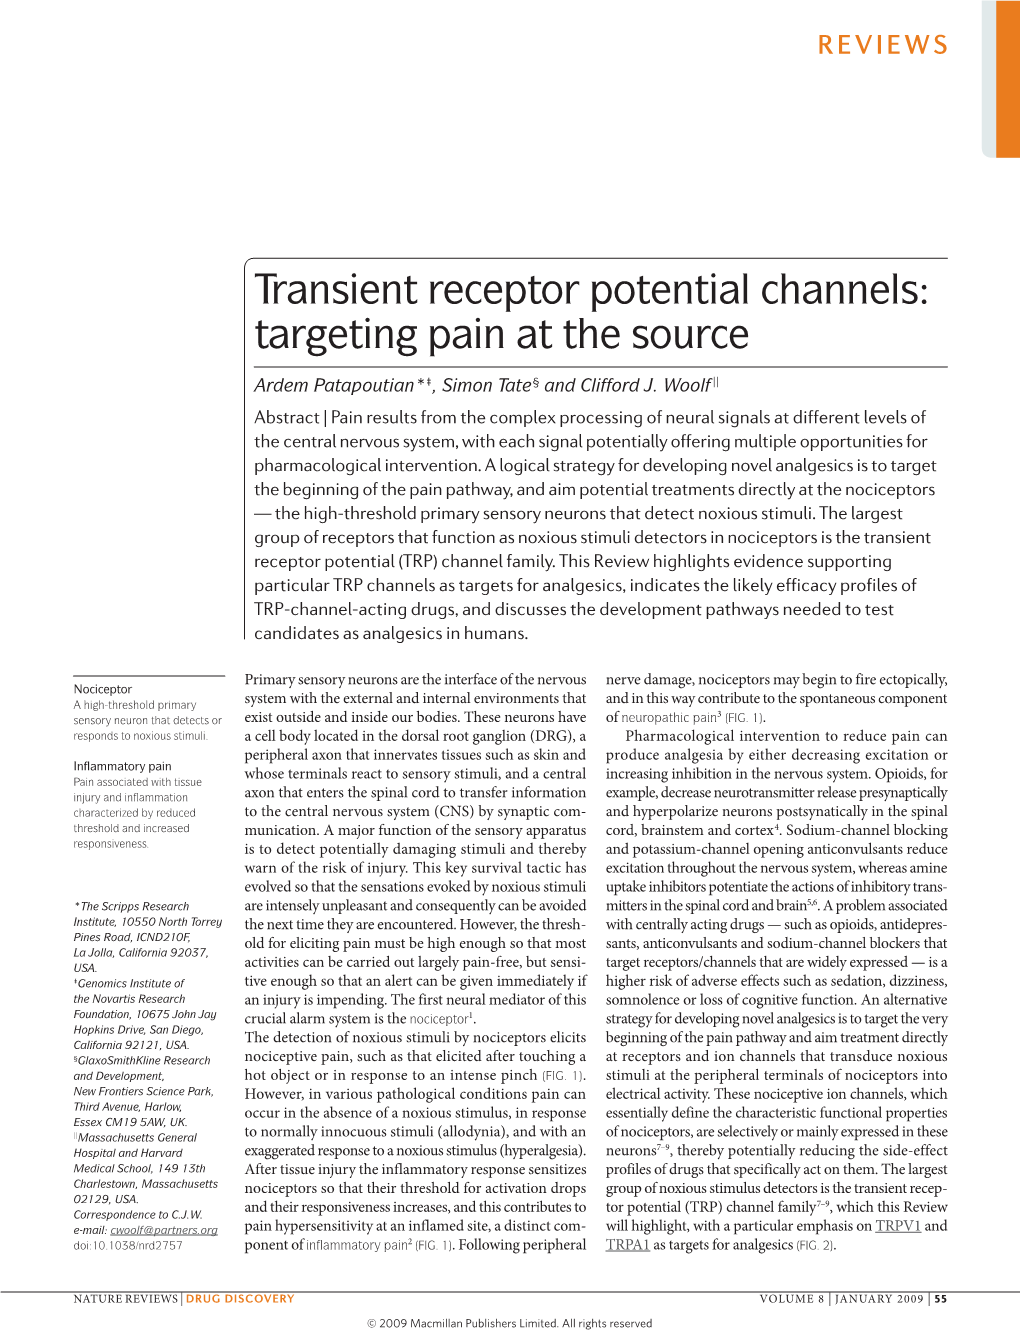 Transient Receptor Potential Channels: Targeting Pain at the Source